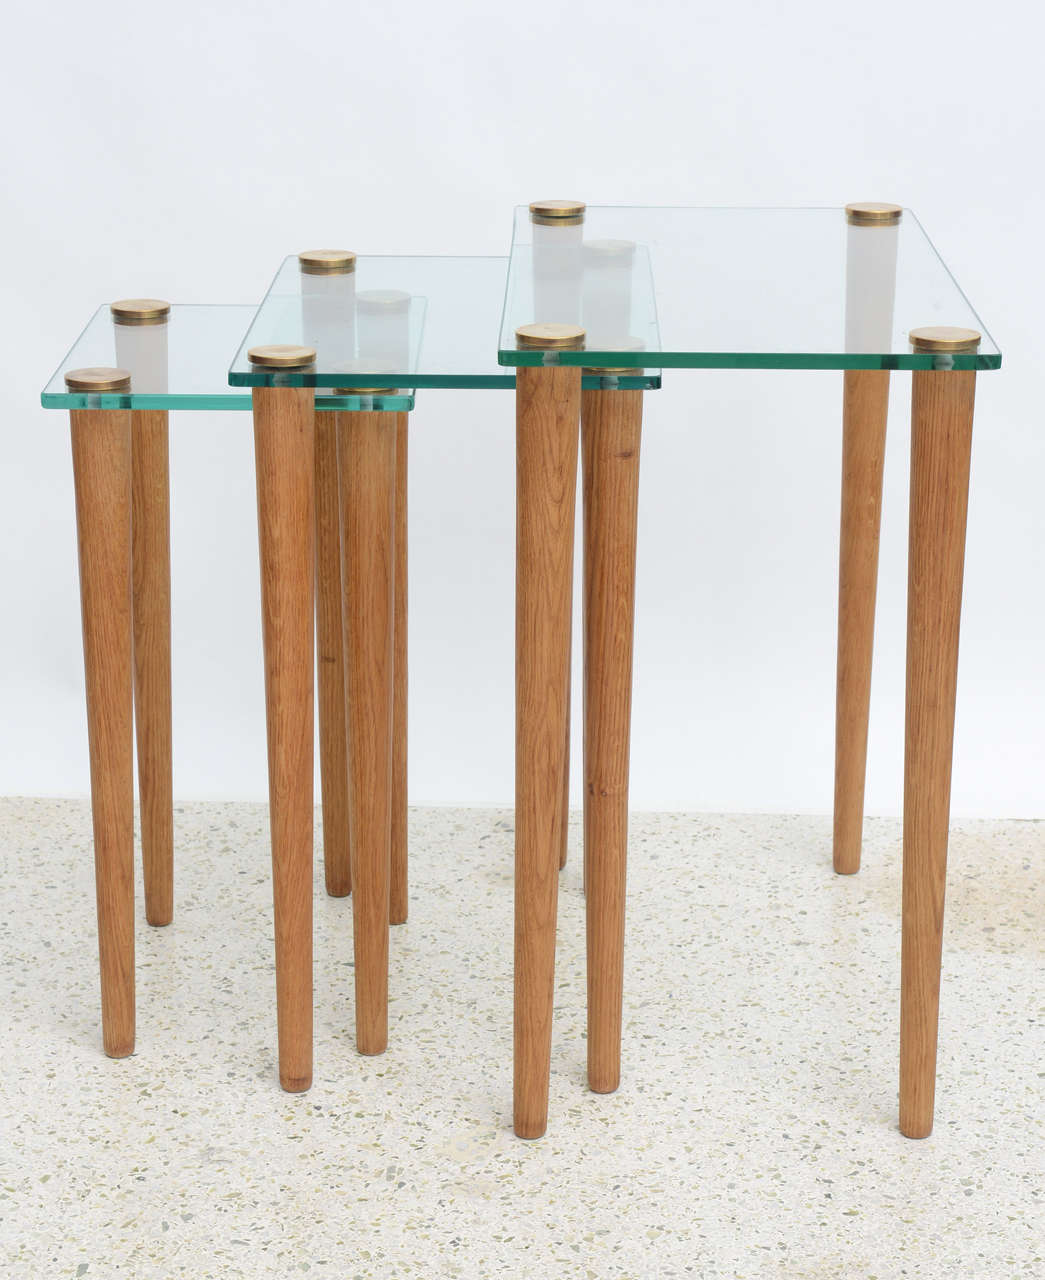 Mid-20th Century American Modern Set of Walnut, Brass and Glass Nesting Tables, Gilbert Rohde